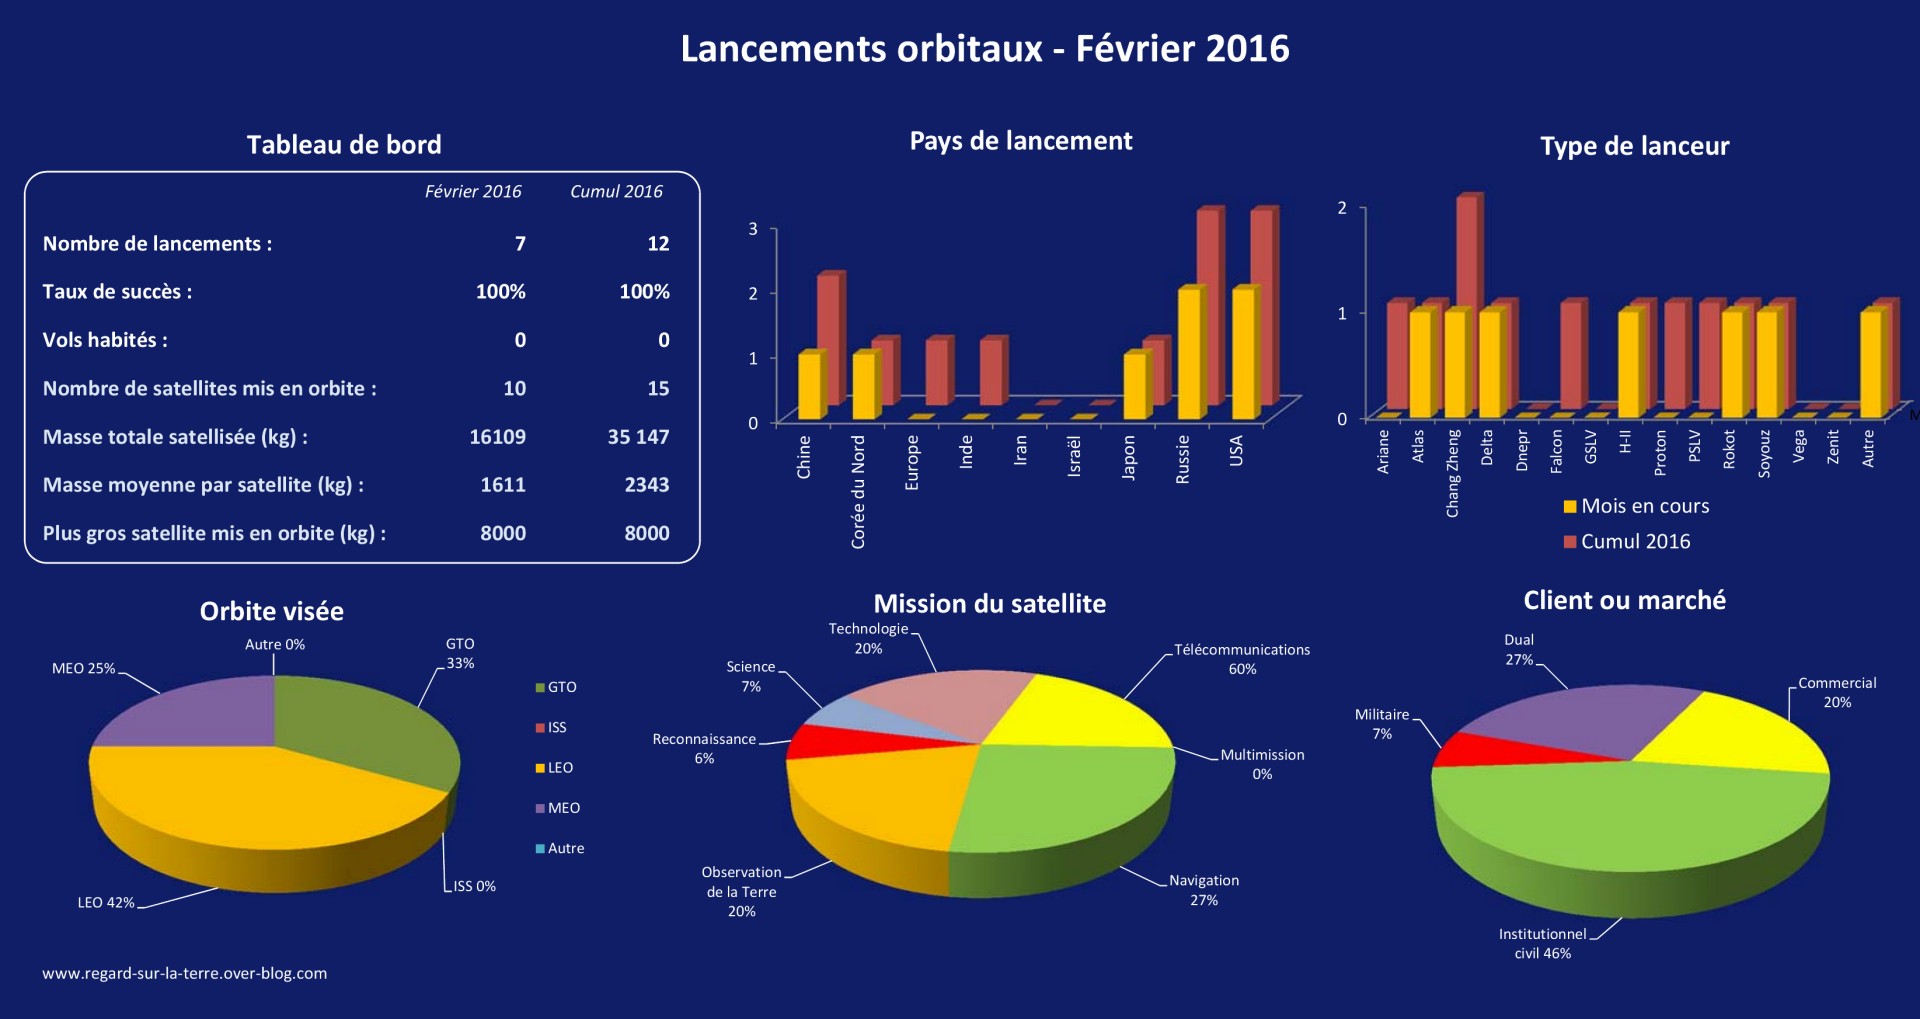 Calendrier spatial - Launch log - Record - Lancements orbitaux - orbital launches - Février 2016 - February 2016